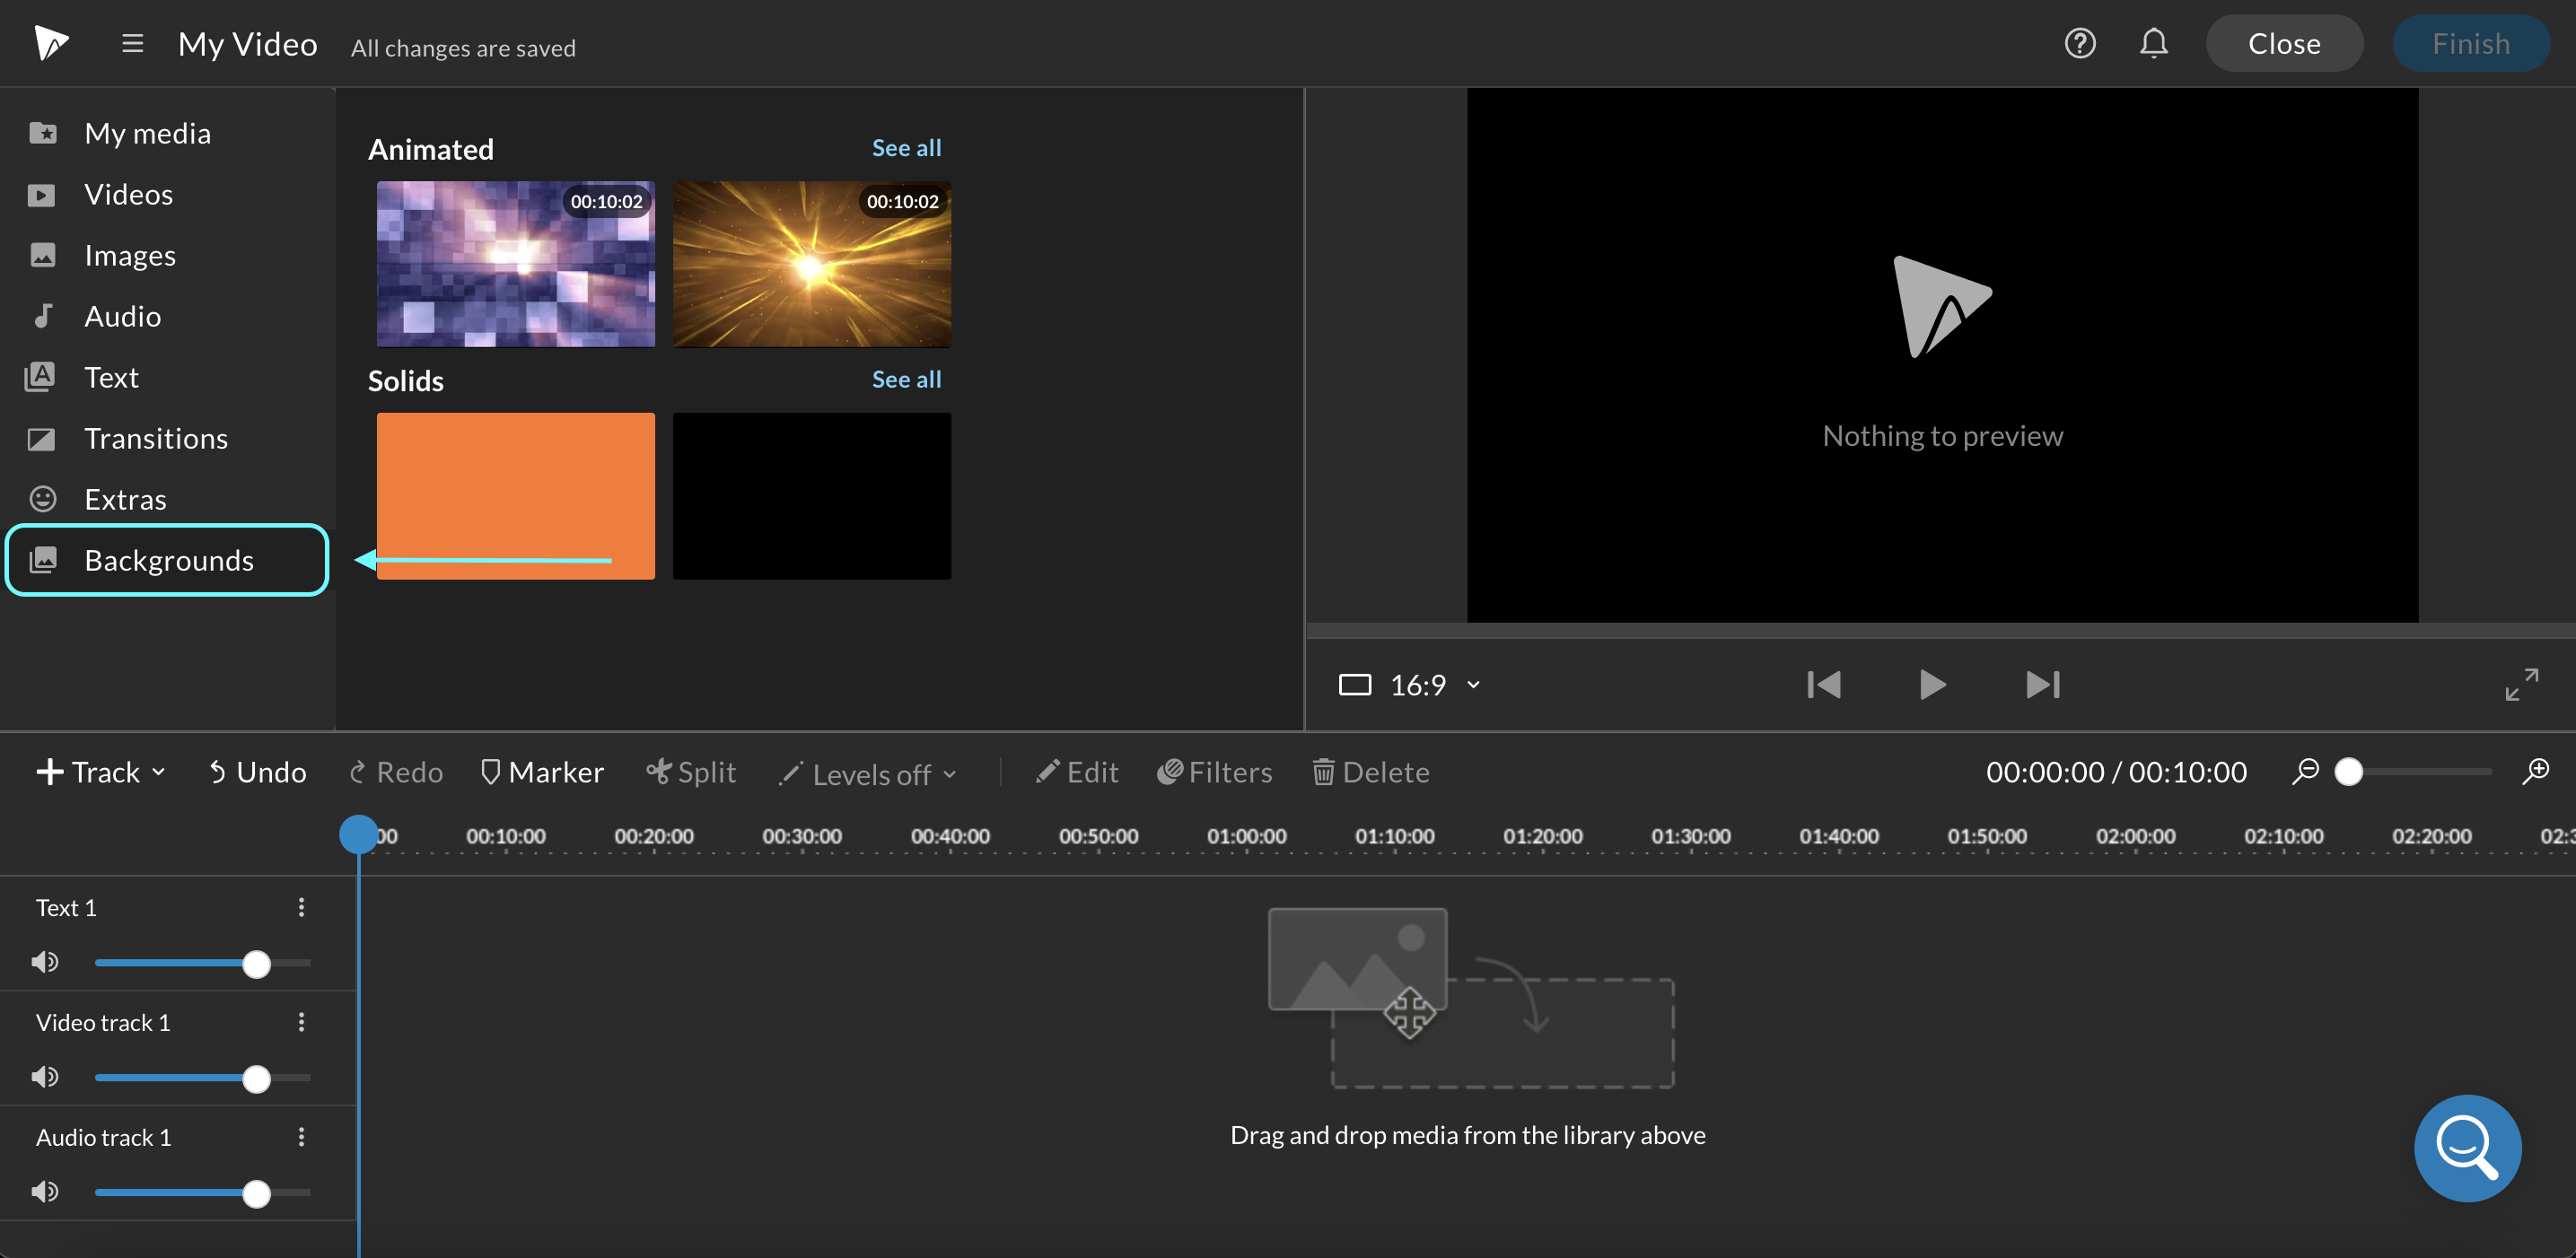 Blue arrow pointing towards the "Backgrounds" tab in the WeVideo timeline editor.